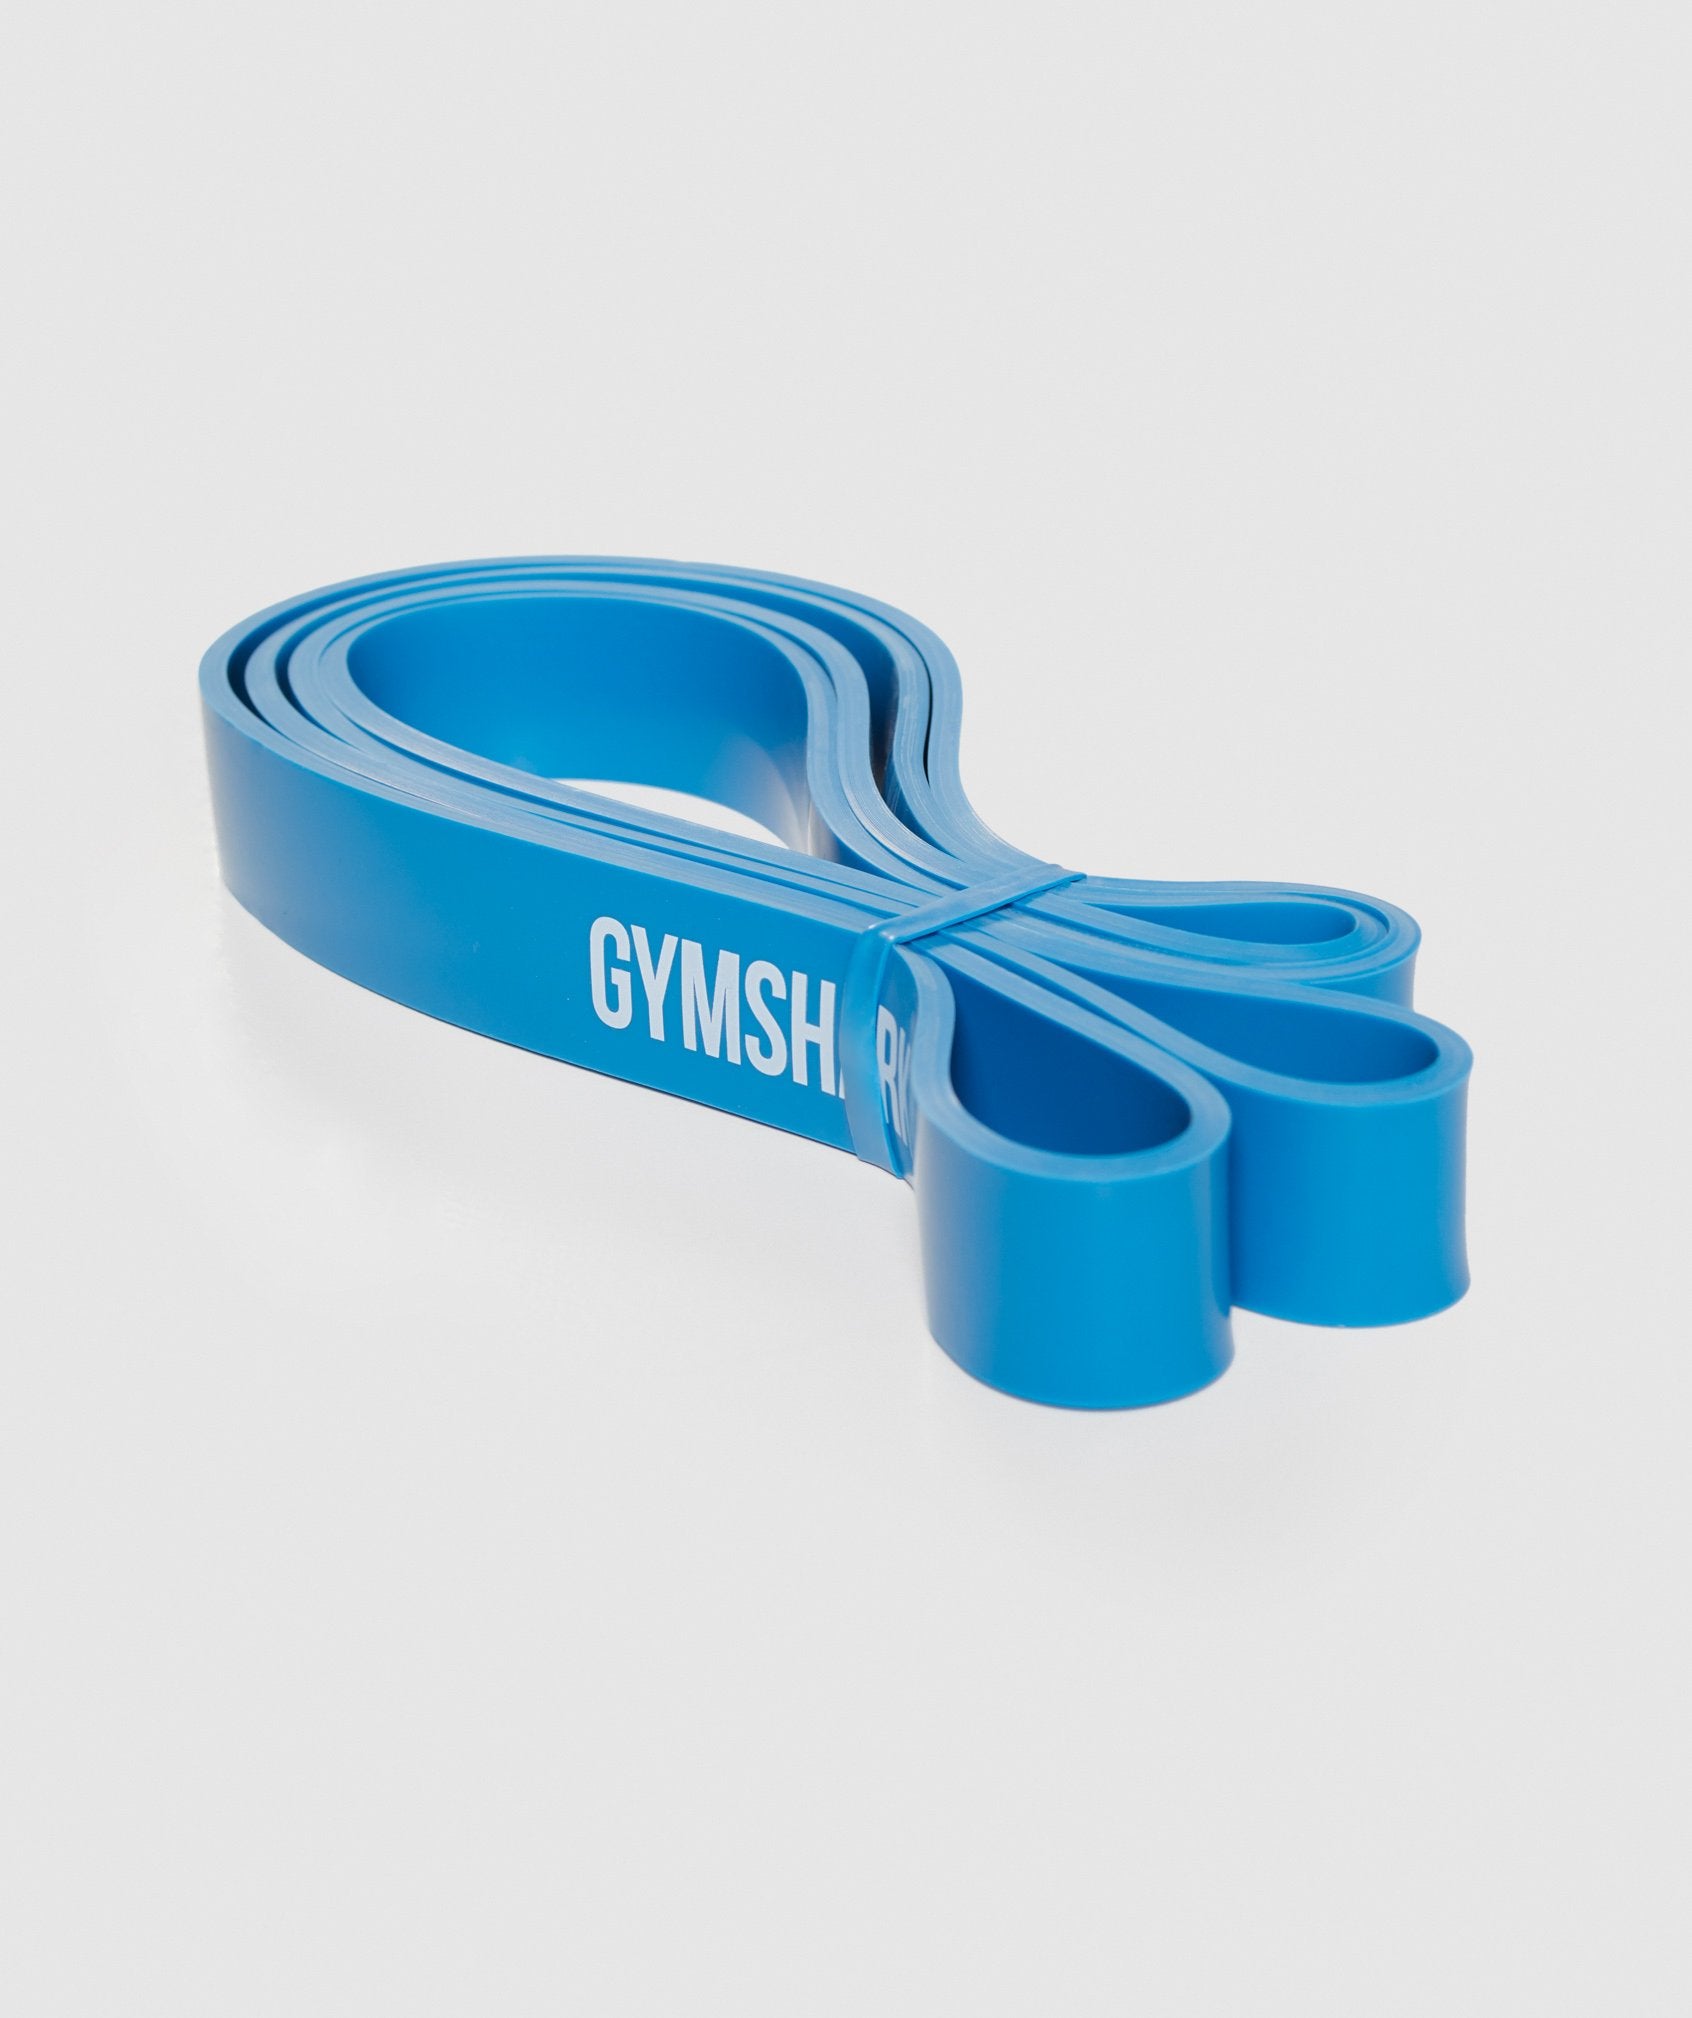 11KG to 36KG Resistance Band in Cobalt Blue - view 1